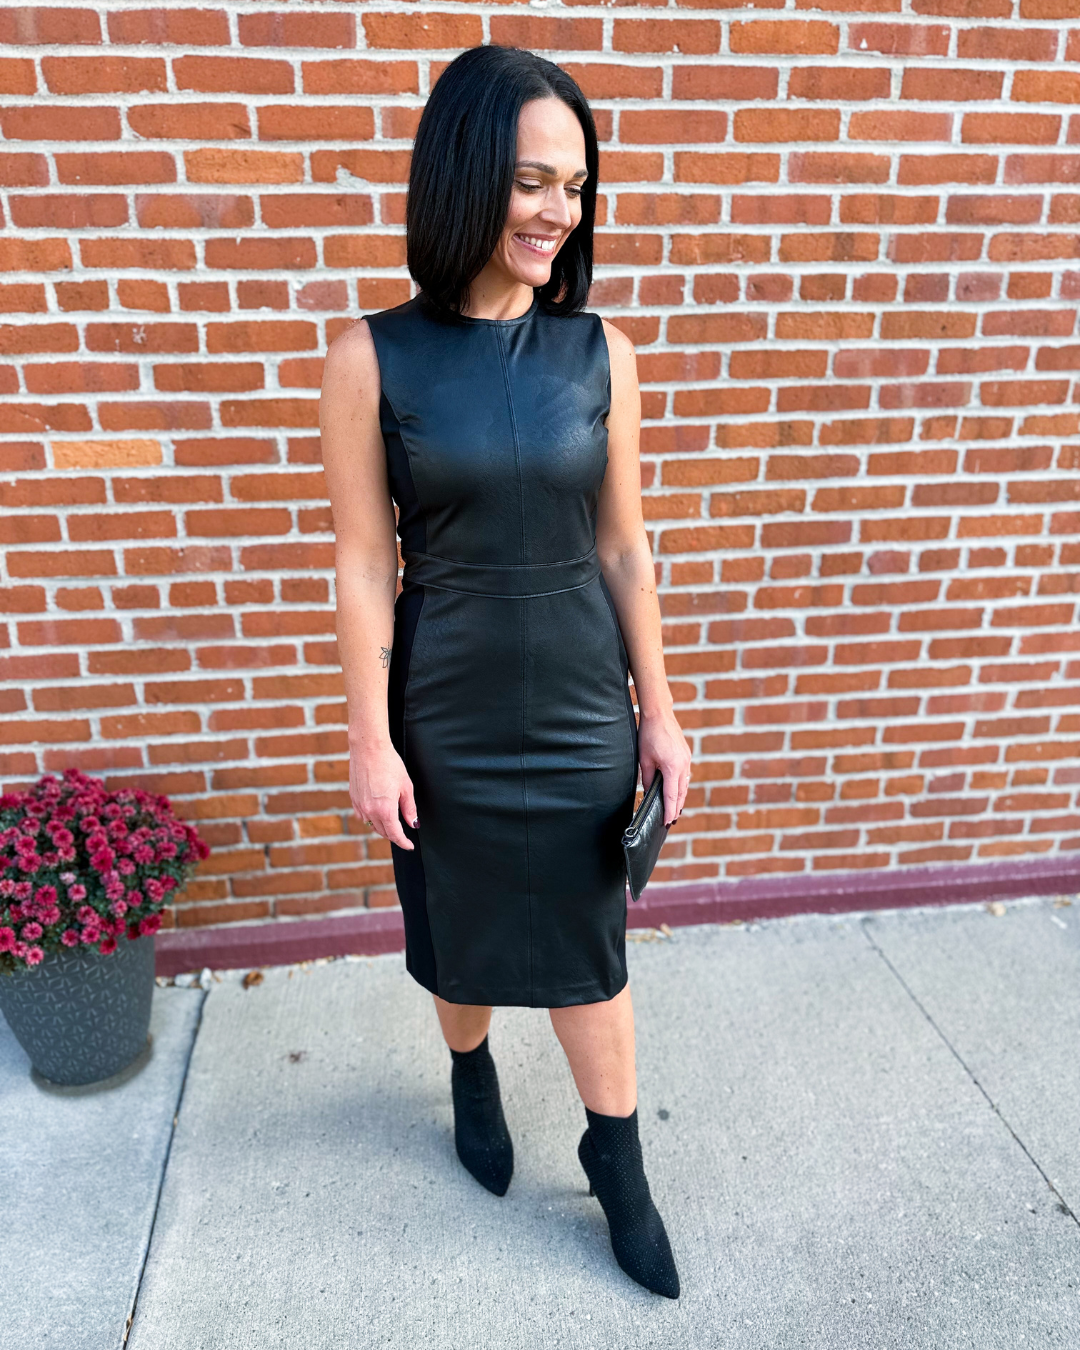 NEW IN: Leather-Like Dresses & Flare! - Spanx